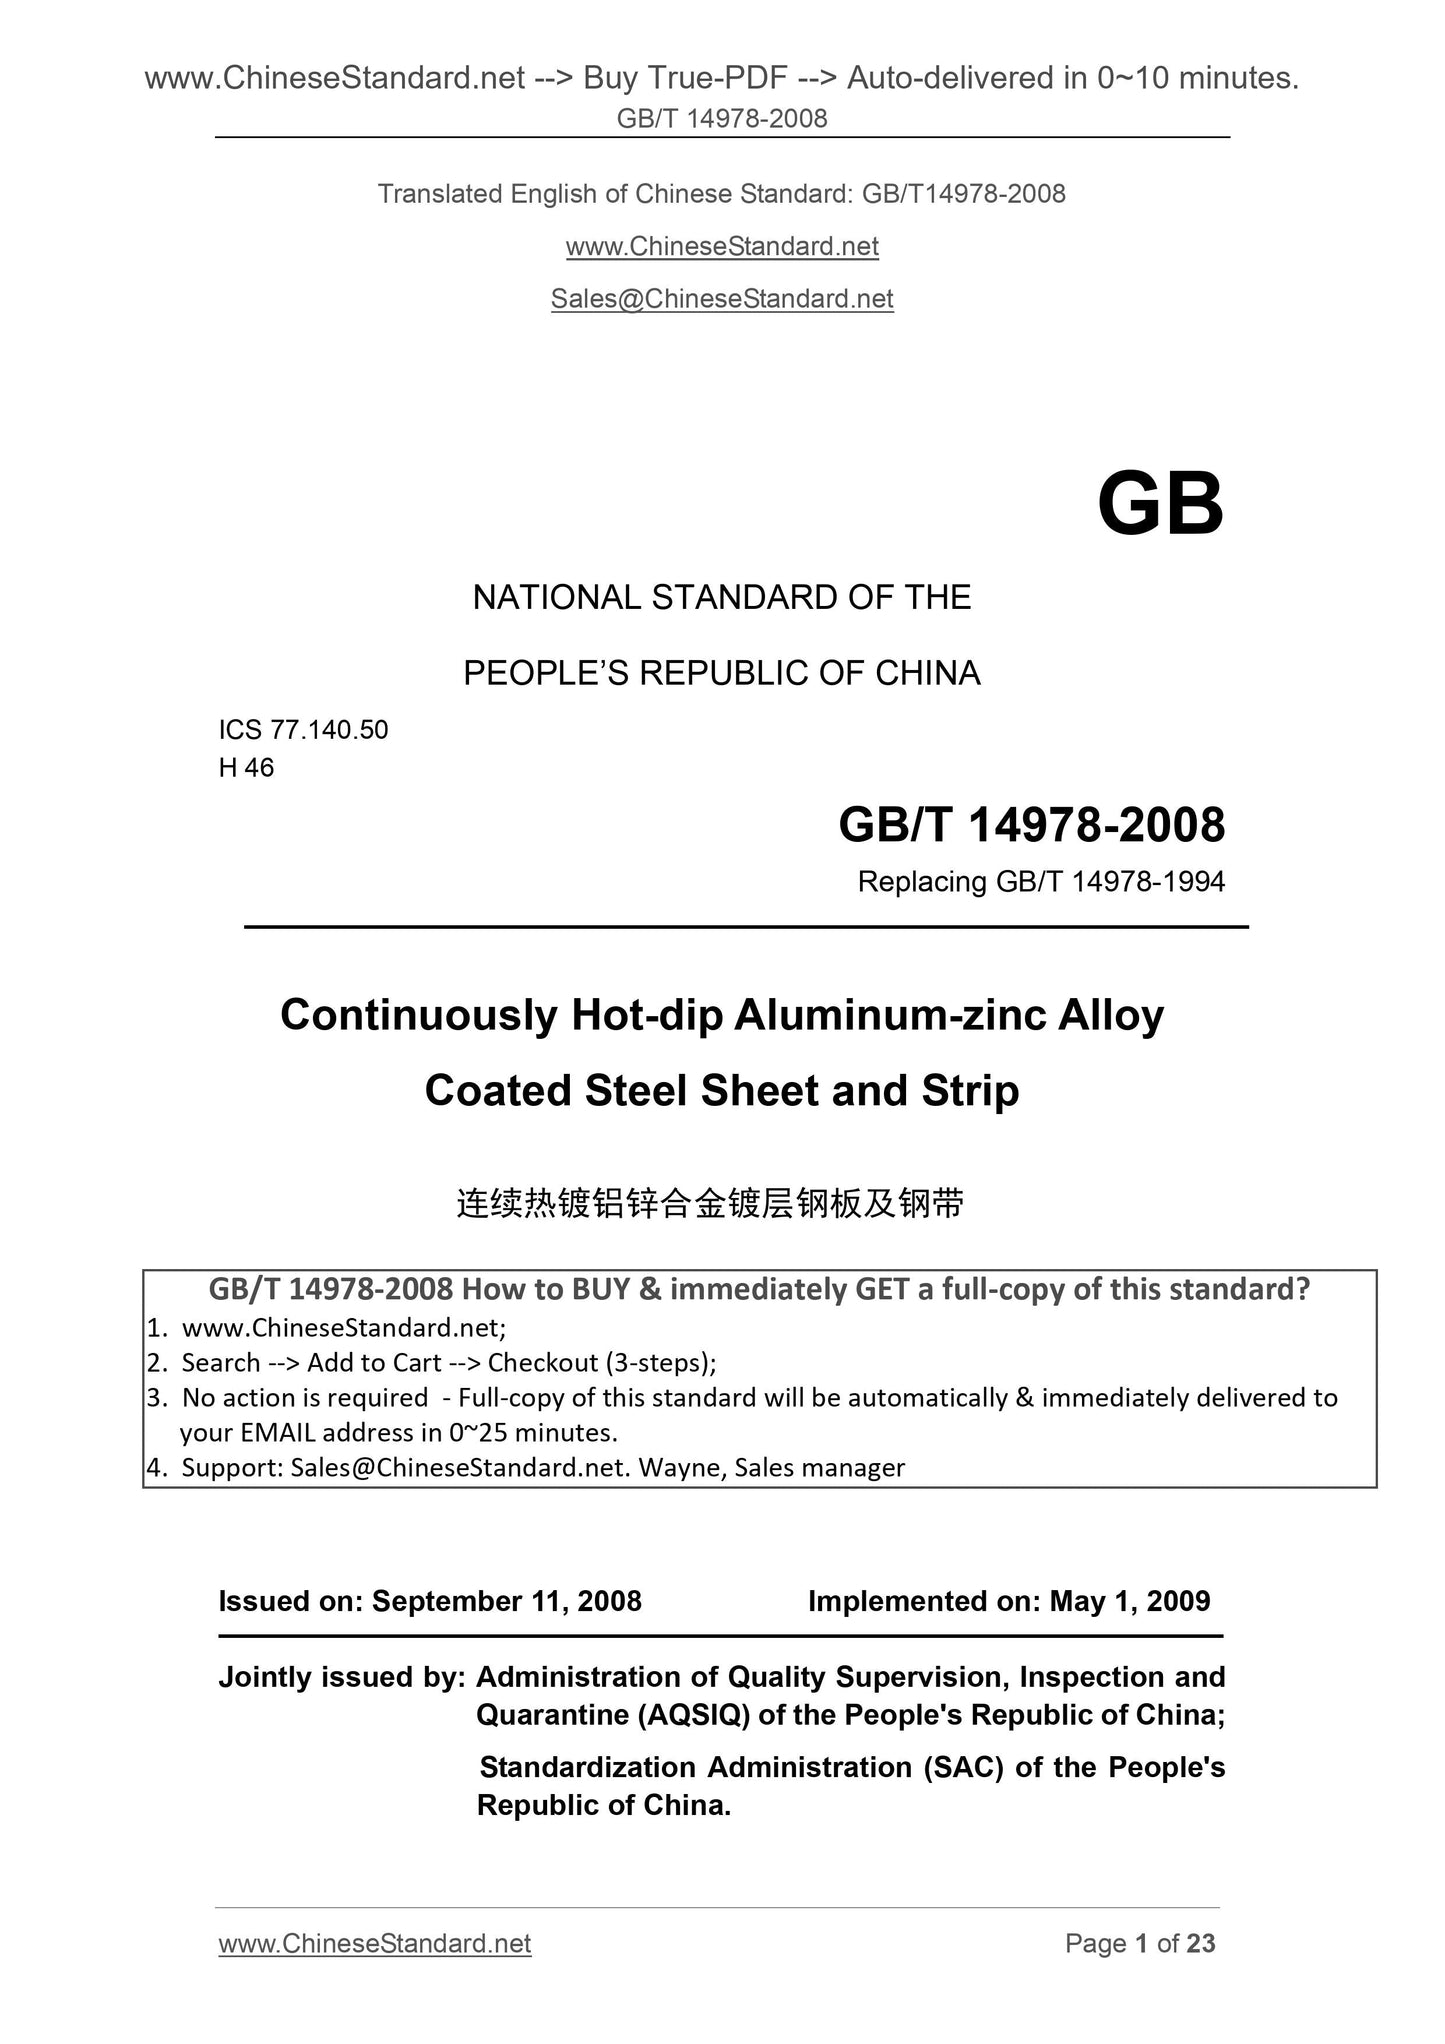 GB/T 14978-2008 Page 1